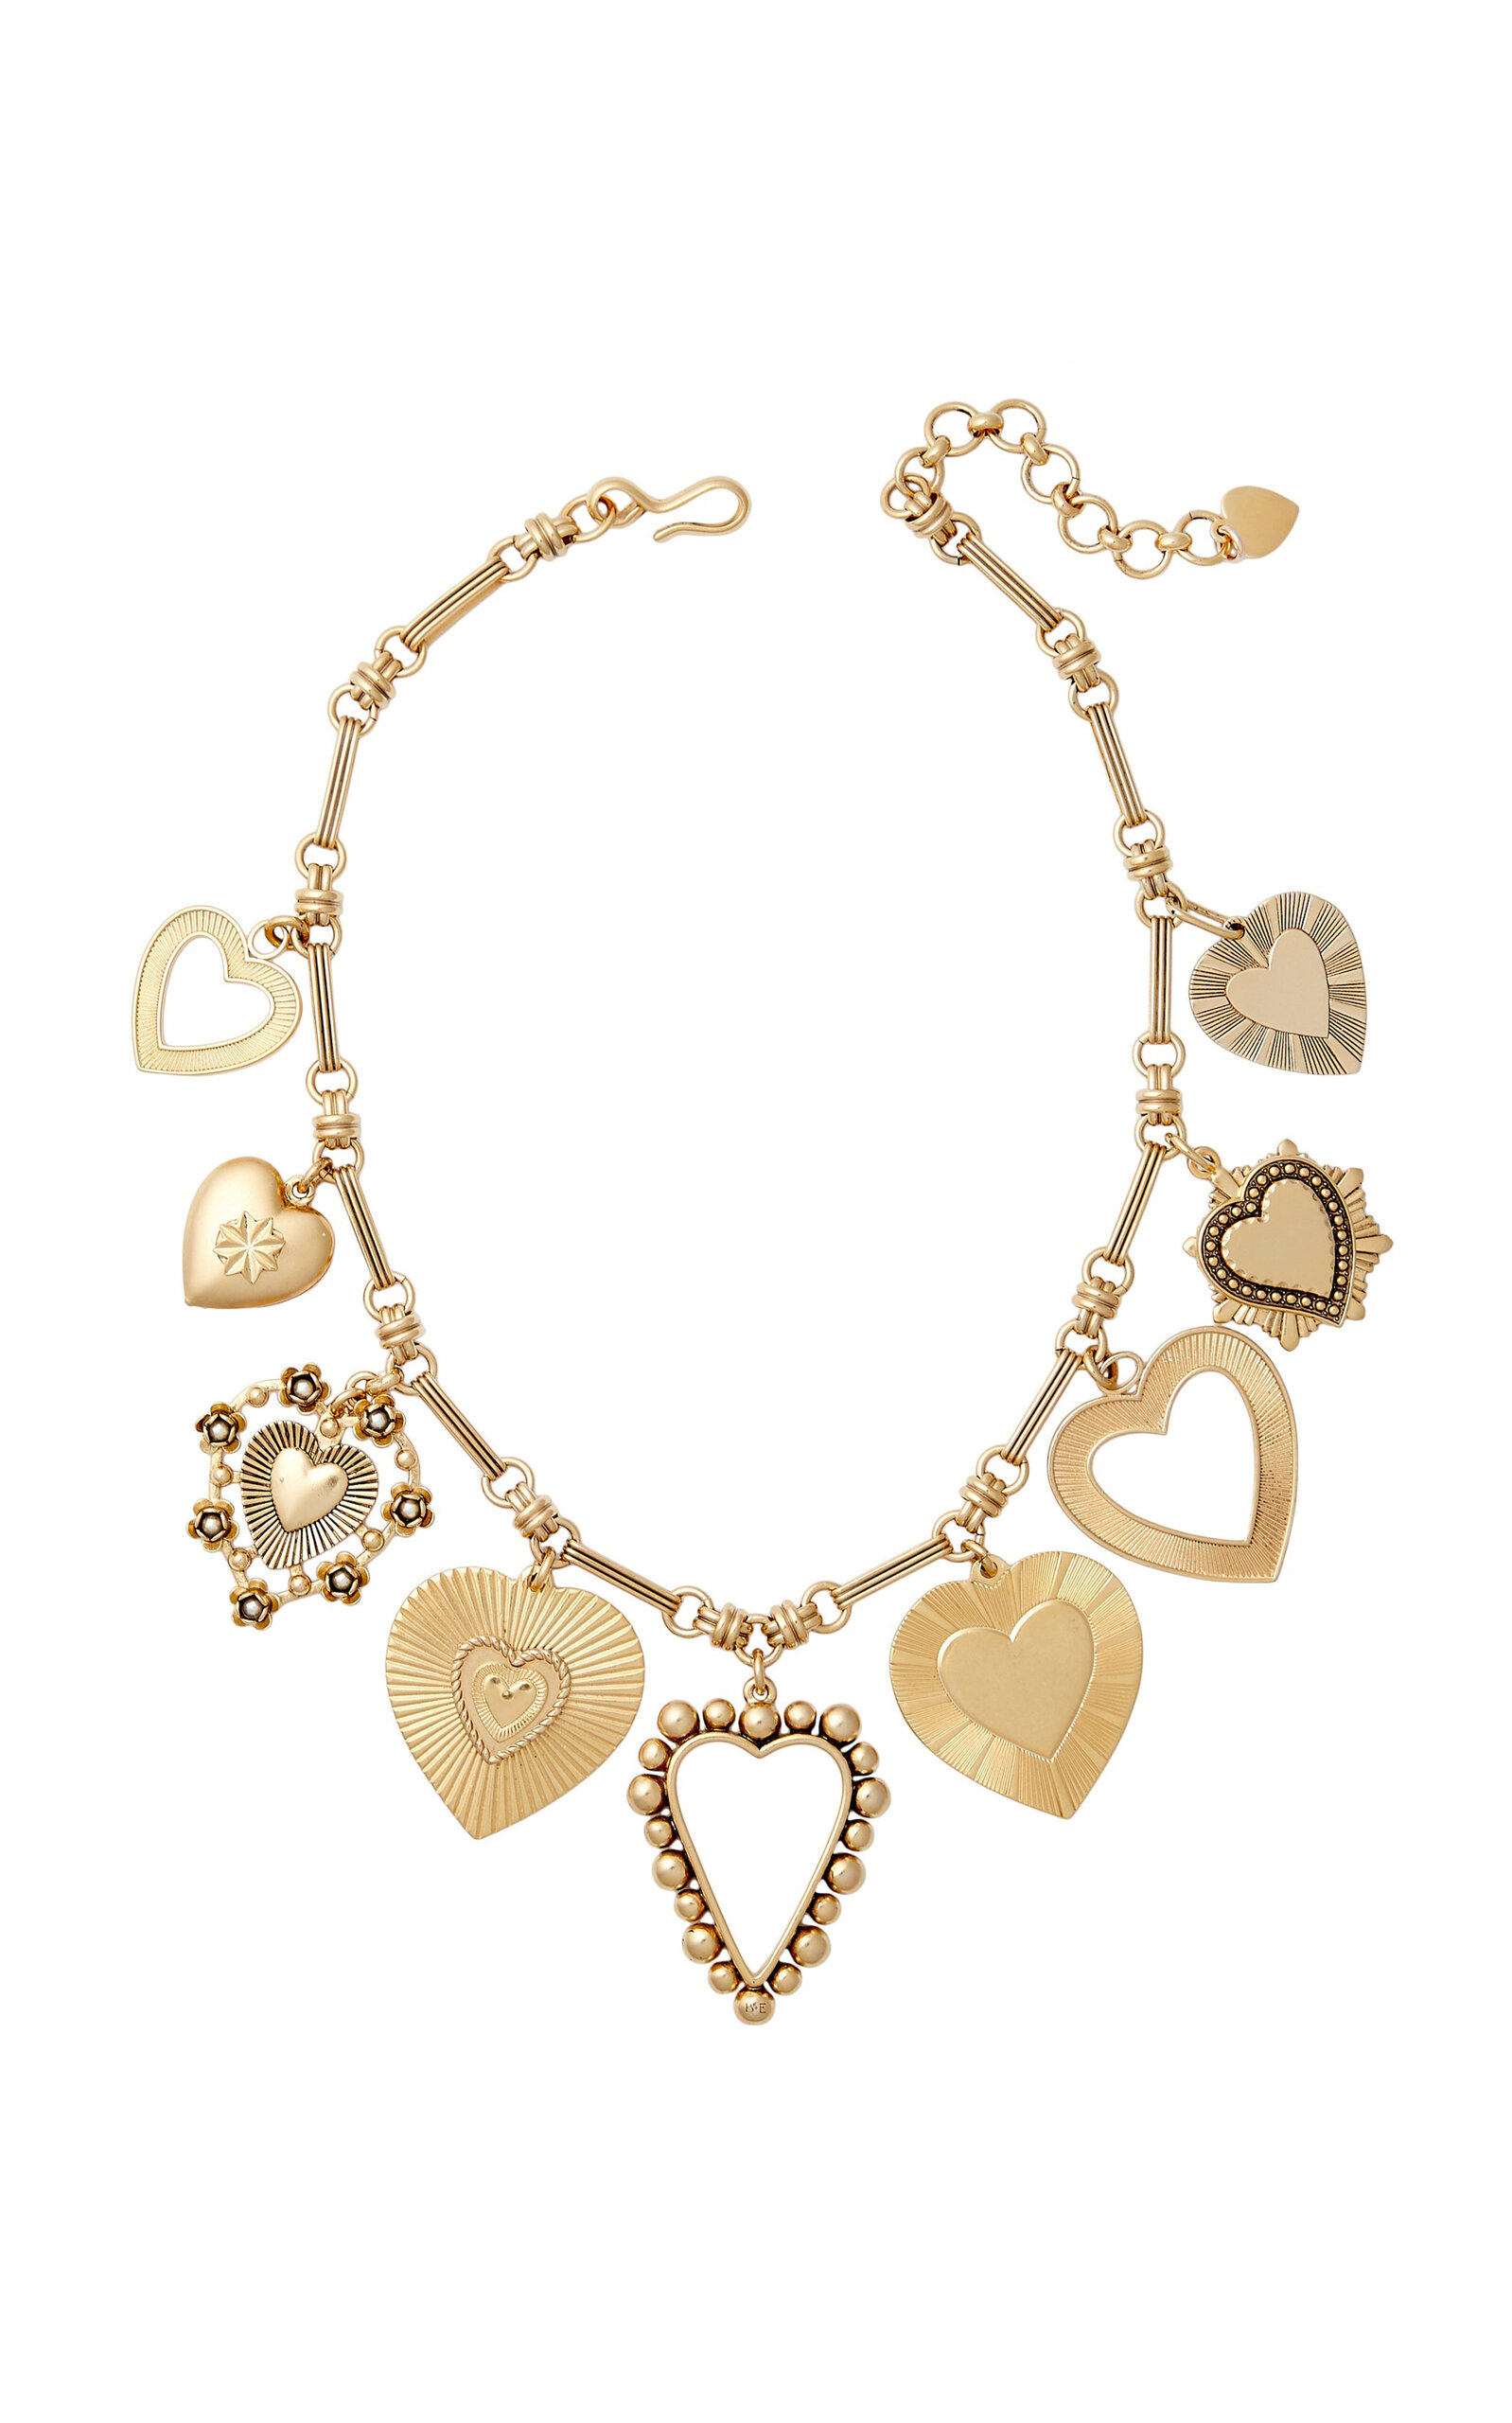 Queen of Hearts 24K Gold-Plated Necklace